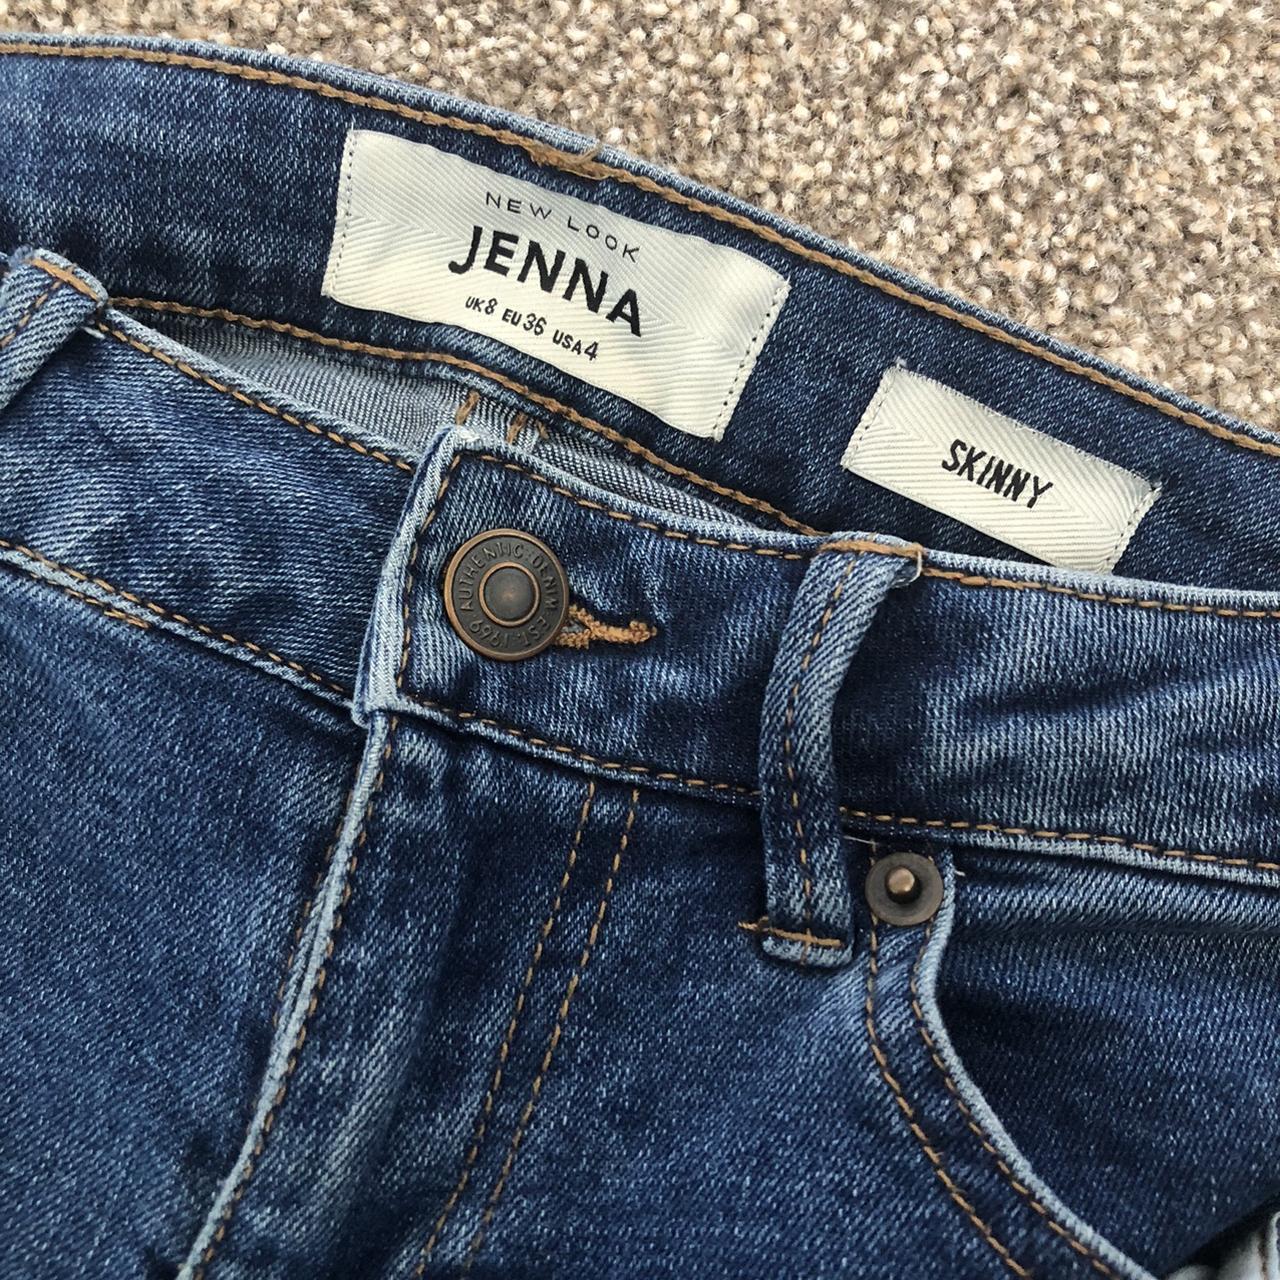 Drik Champagne Passiv New Look Jenna Skinny ripped jeans. Size 8 would... - Depop